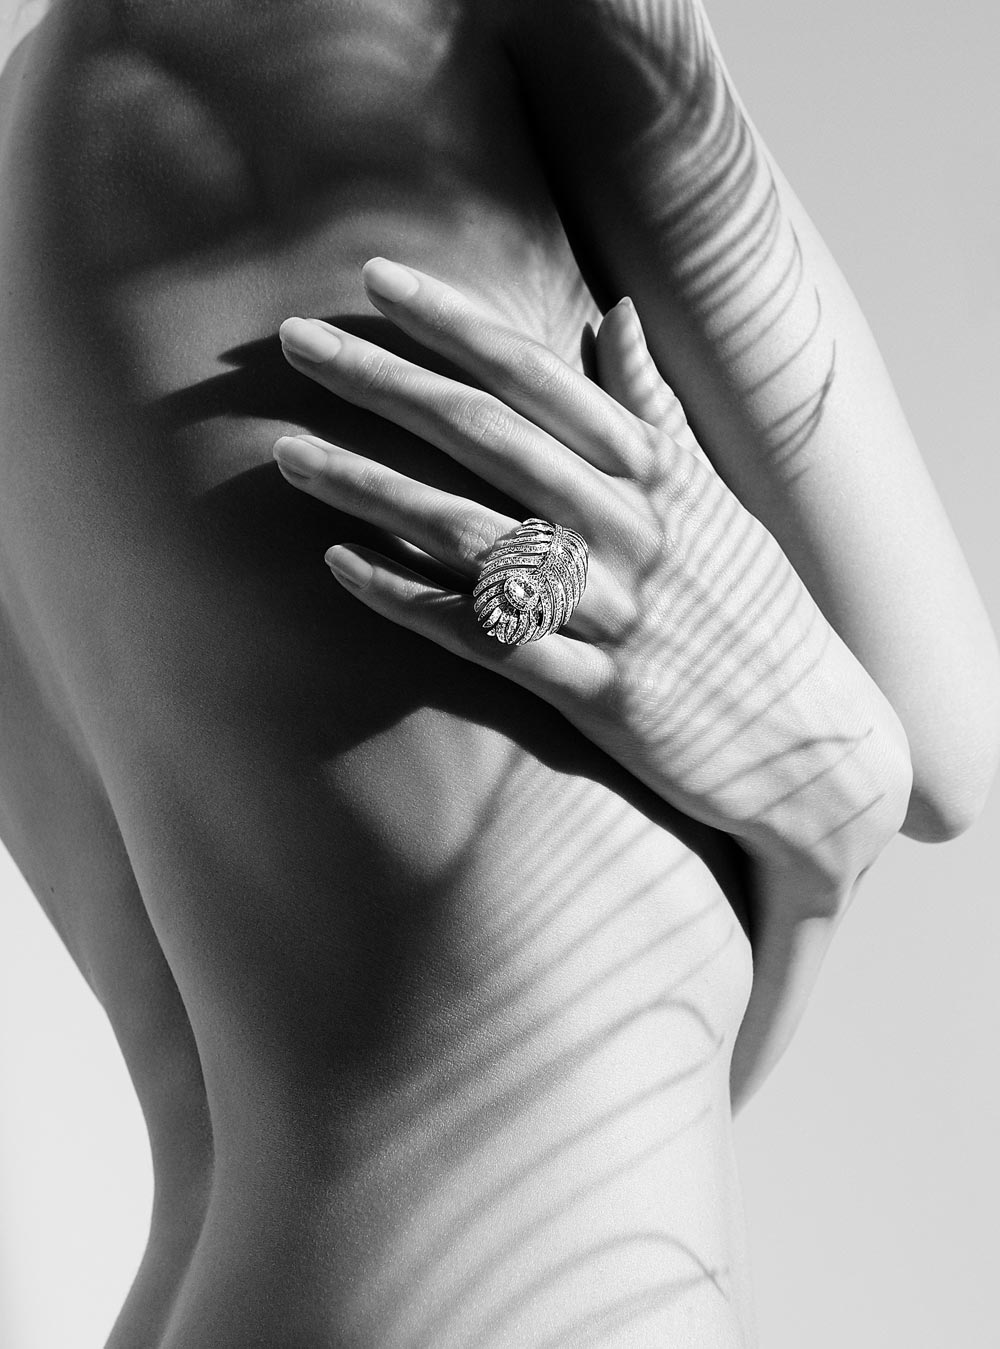 Boucheron Plume de Paon ring, large version, set with one rose-cut diamond and paved with diamonds, in white gold